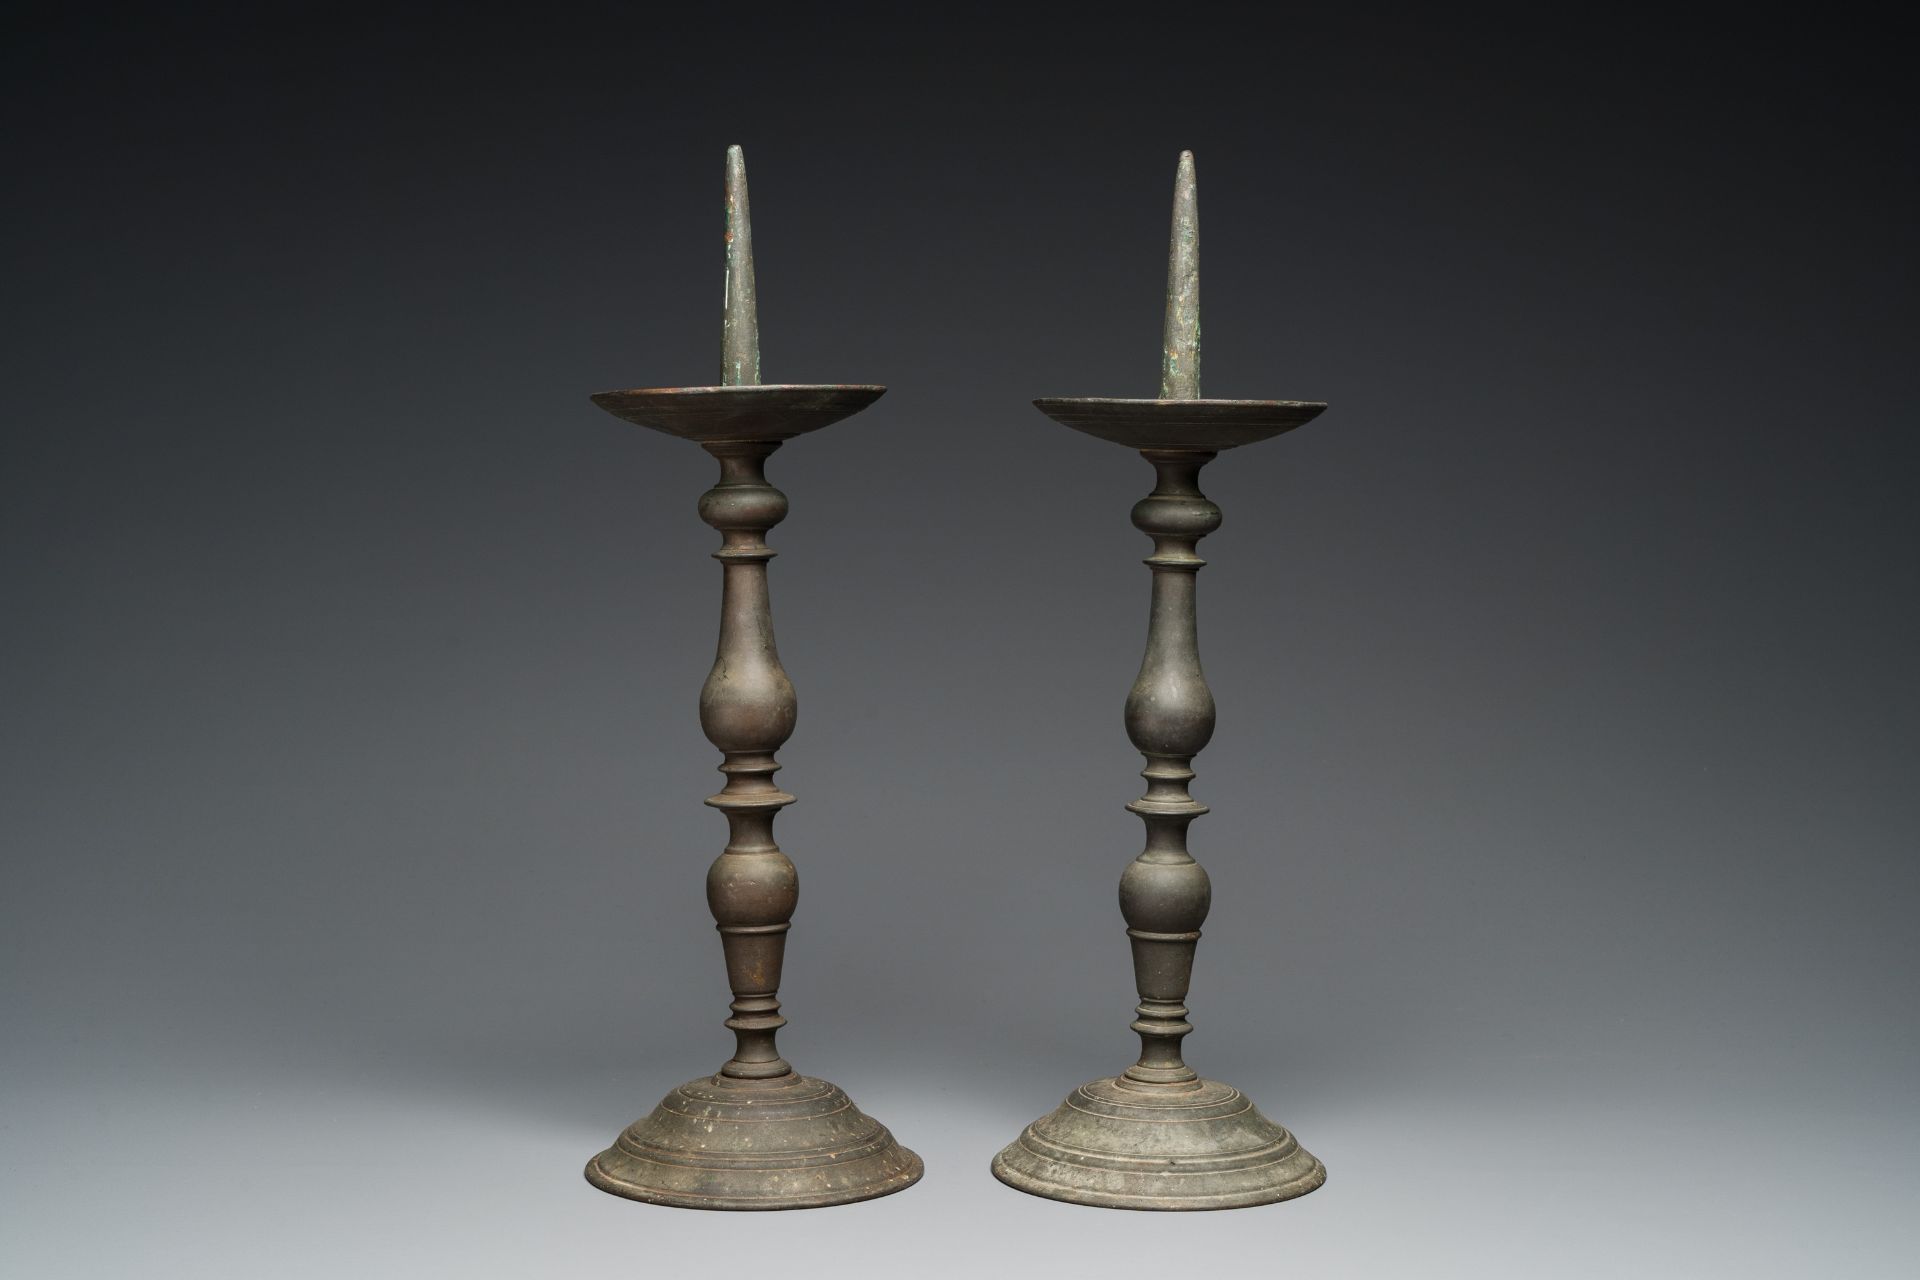 A pair of patinated bronze pricket candlesticks, France, 17th C. - Image 3 of 7